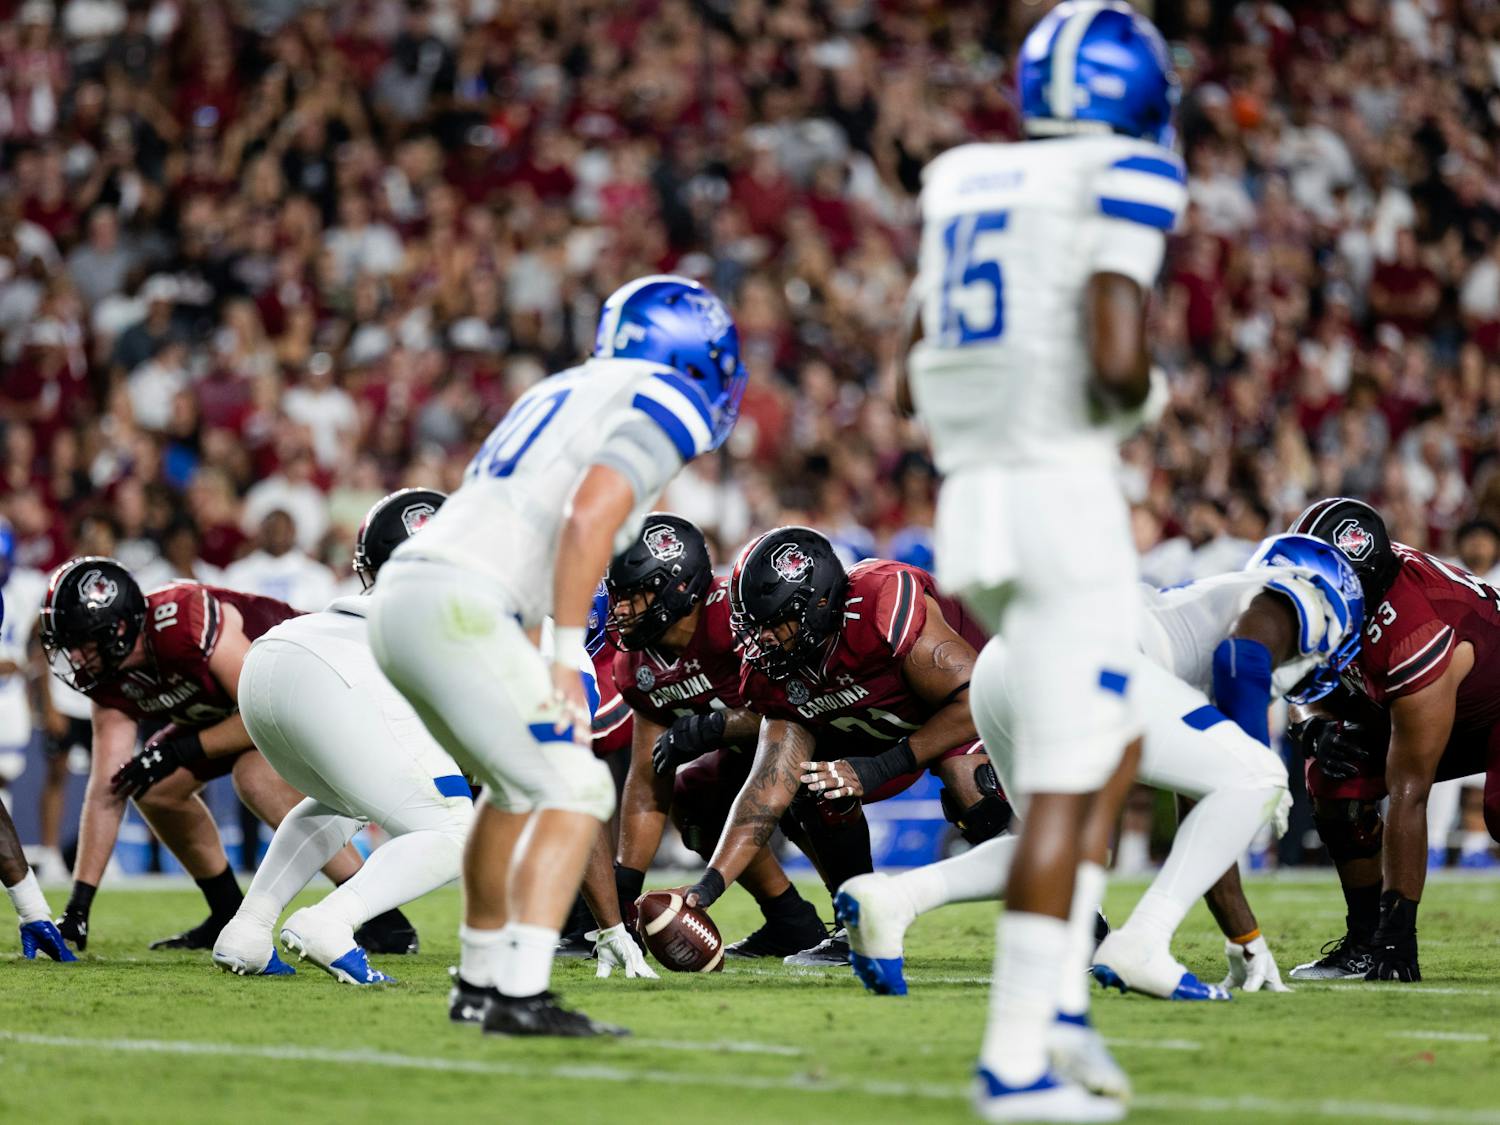 The defensive line gets into position against Georgia State on Sept. 3, 2022. The Gamecocks won 35-14.&nbsp;